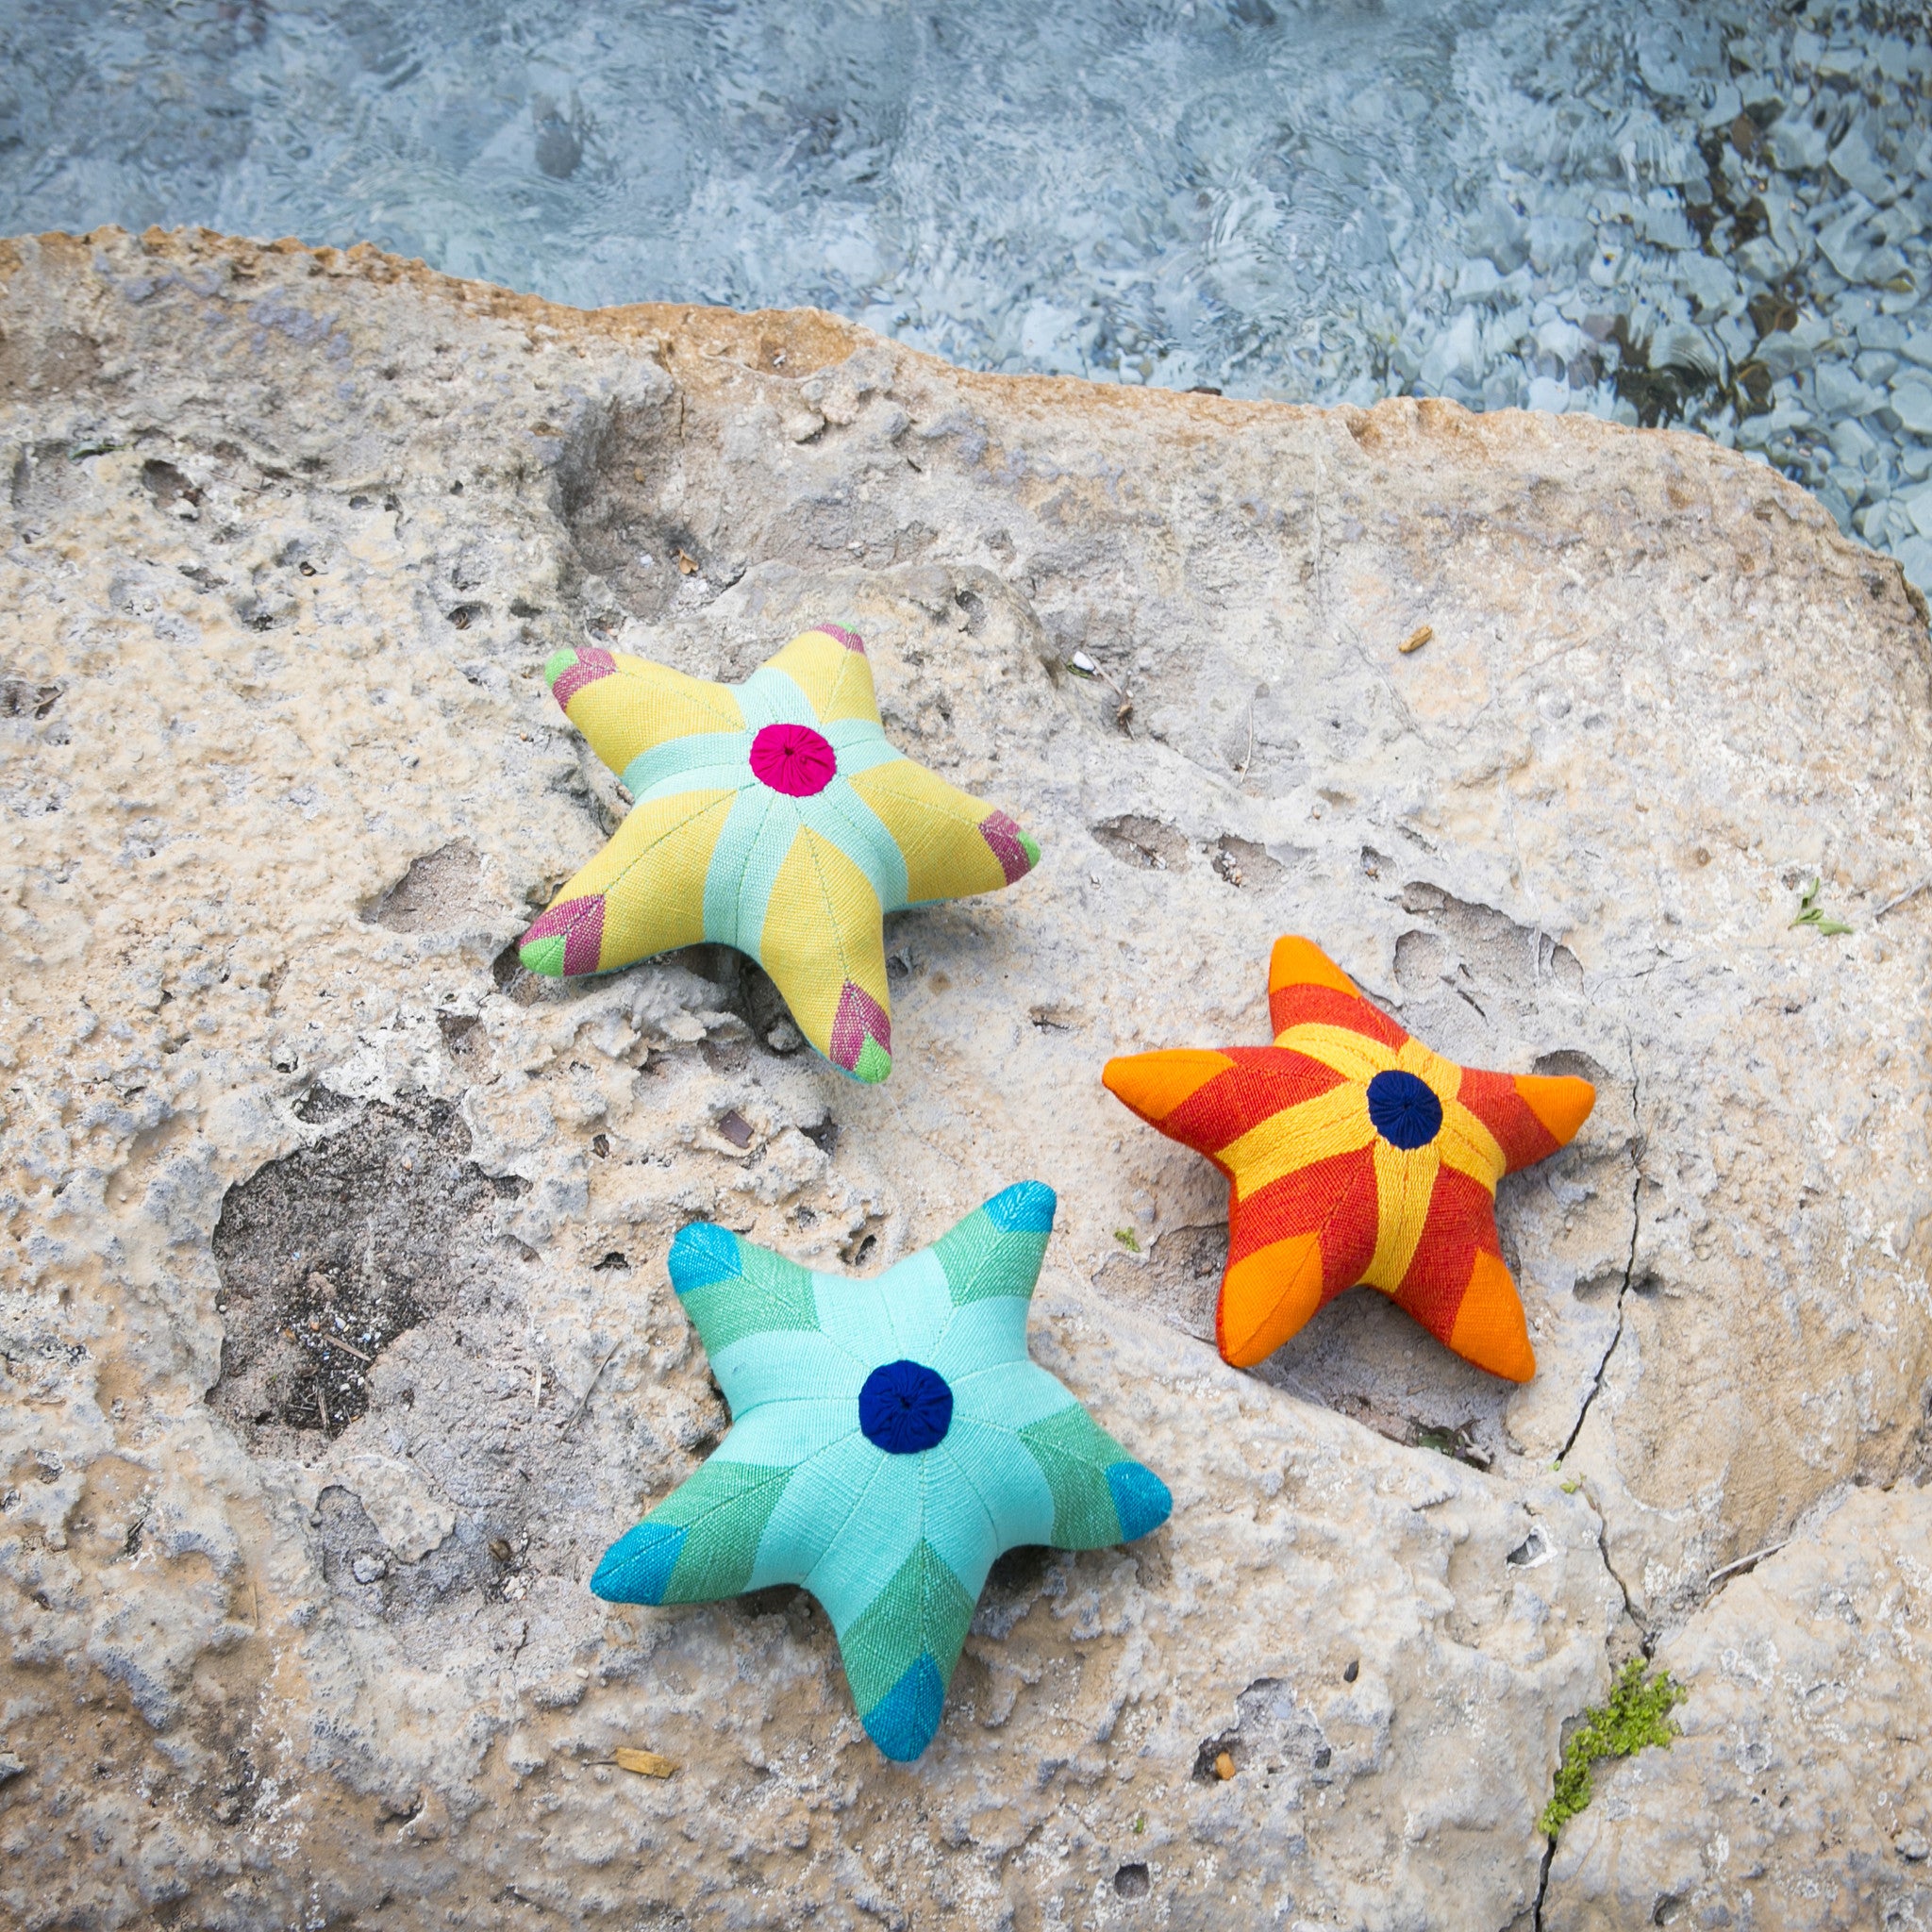 Summer (pastel shades) & Scully, the Starfish – Enjoying a day in the sun!